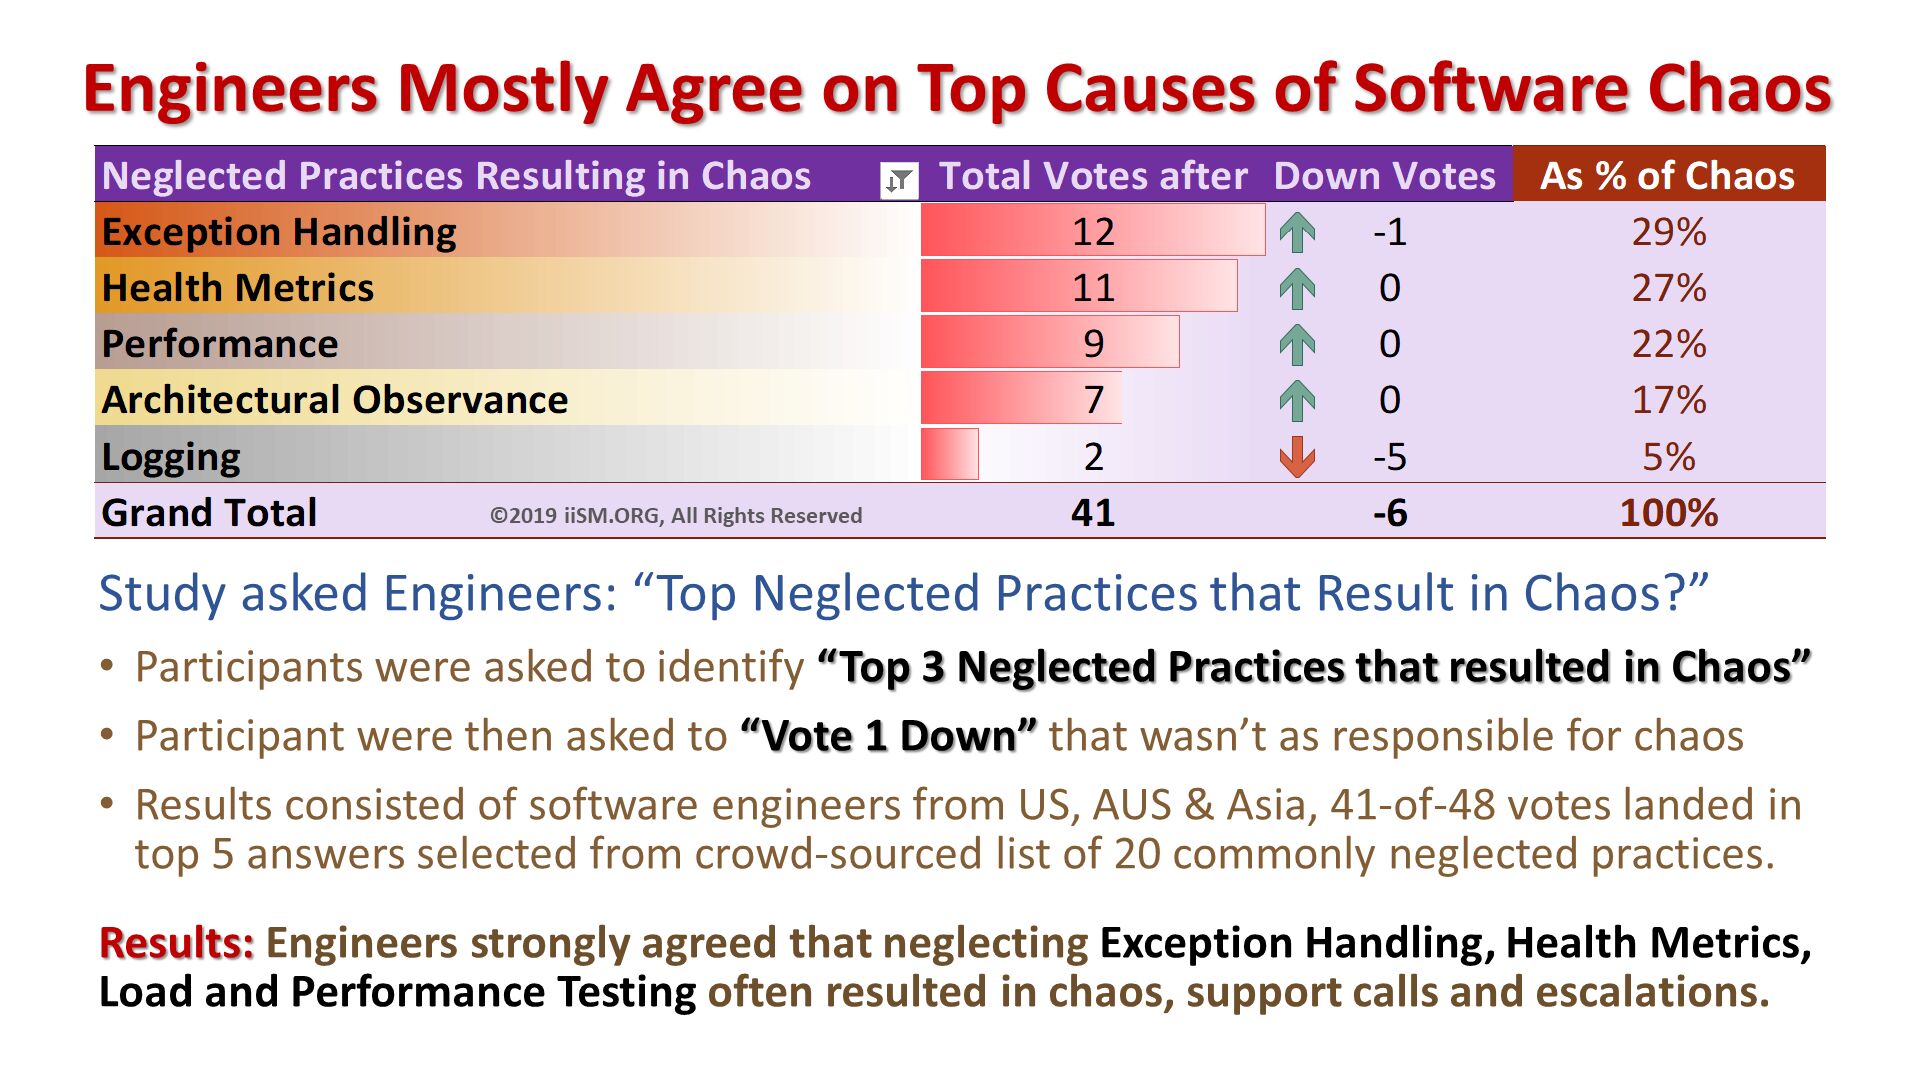 Study asked Engineers: “Top Neglected Practices that Result in Chaos?” 
Participants were asked to identify “Top 3 Neglected Practices that resulted in Chaos”
Participant were then asked to “Vote 1 Down” that wasn’t as responsible for chaos
Results consisted of software engineers from US, AUS & Asia, 41-of-48 votes landed in top 5 answers selected from crowd-sourced list of 20 commonly neglected practices.
Results: Engineers strongly agreed that neglecting Exception Handling, Health Metrics, Load and Performance Testing often resulted in chaos, support calls and escalations. . Engineers Mostly Agree on Top Causes of Software Chaos. ©2019 iiSM.ORG, All Rights Reserved. 